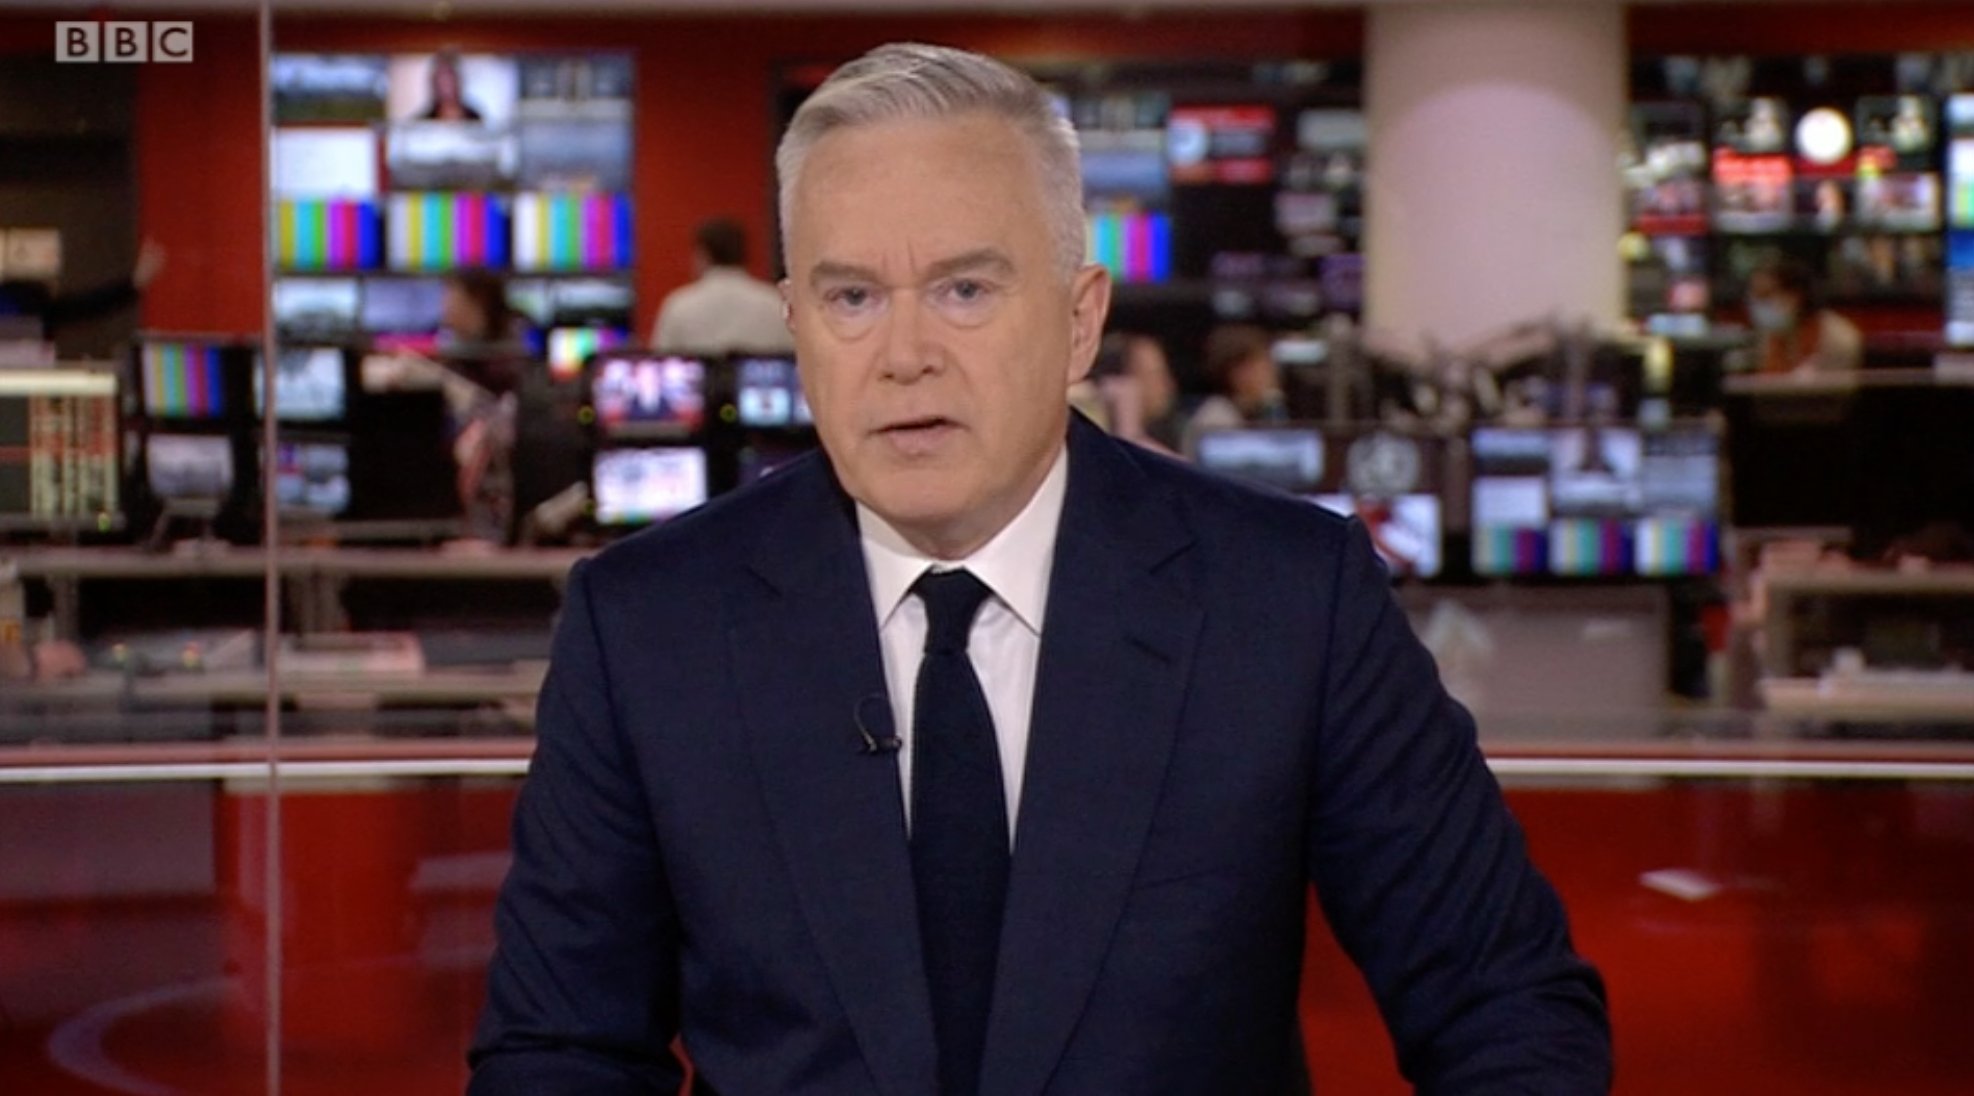 Scott Bryan on Twitter: "Huw Edwards is now presenting on BBC One, BBC World News and others wearing a black tie. https://t.co/Q1HOqLD2MT" / Twitter